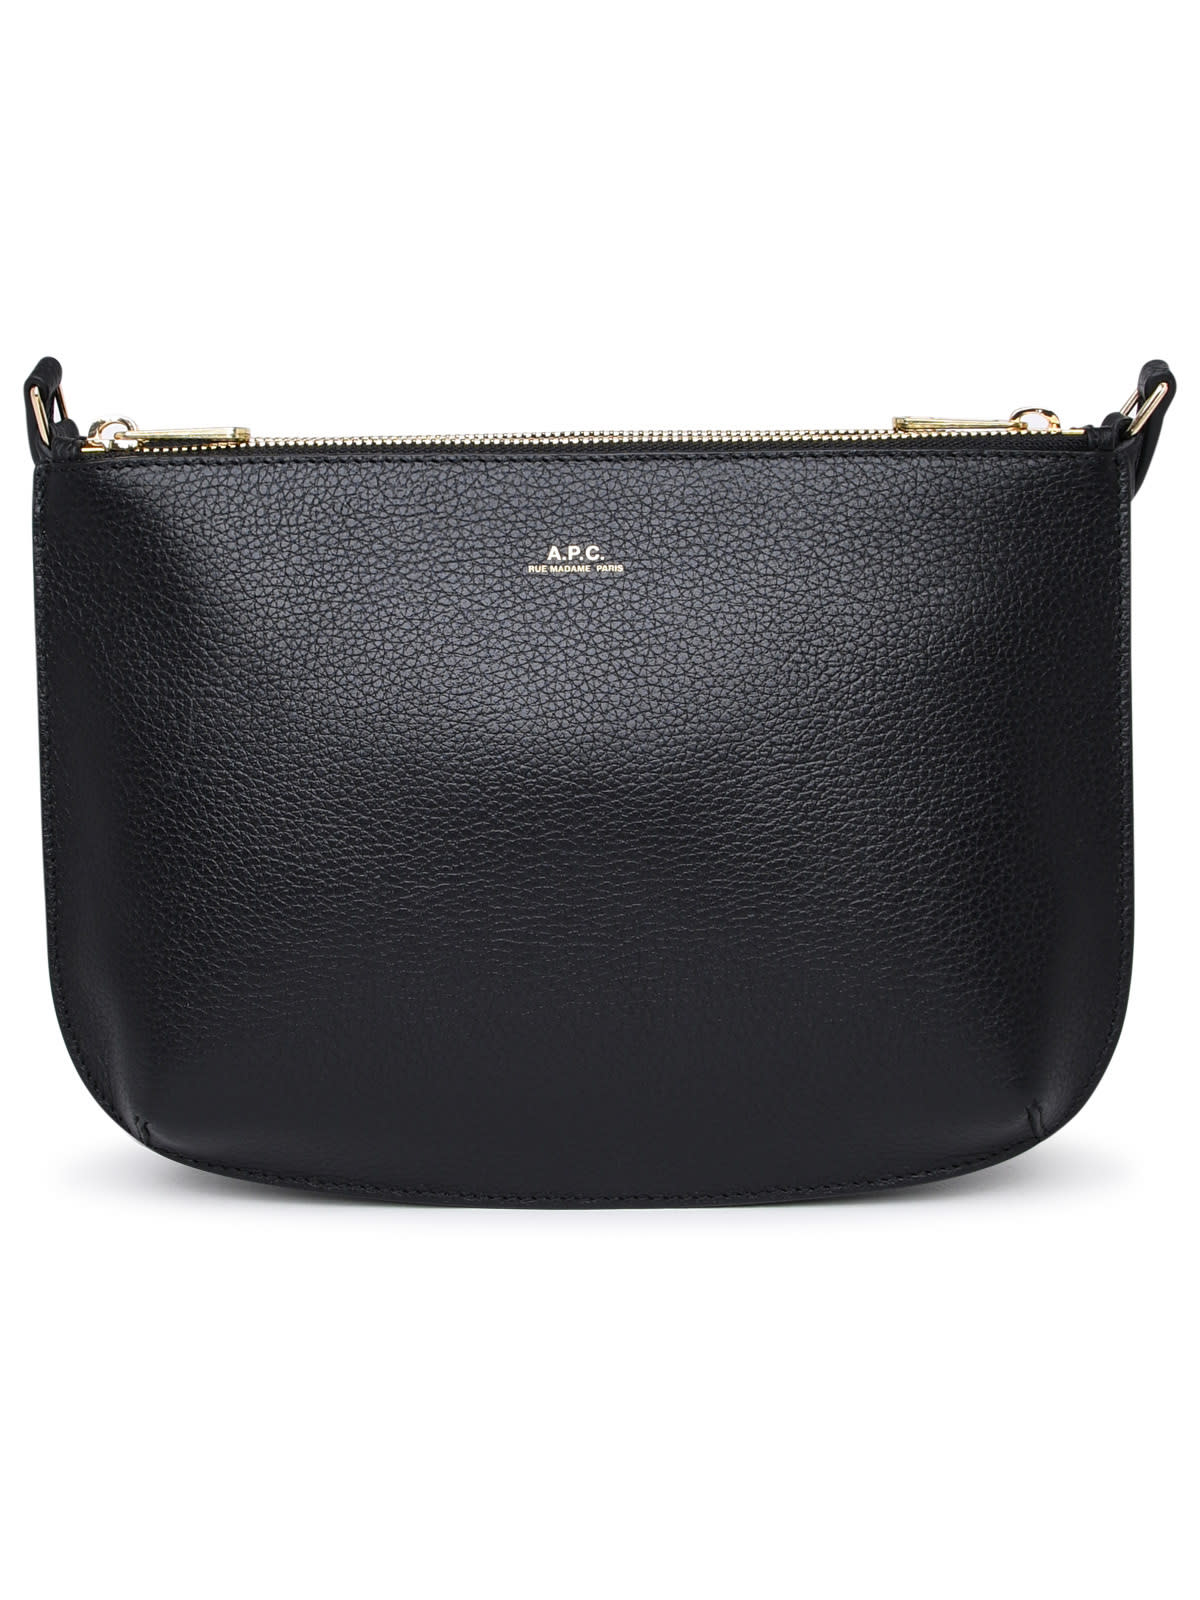 A. P.C. Sarah Bag In Black Leather